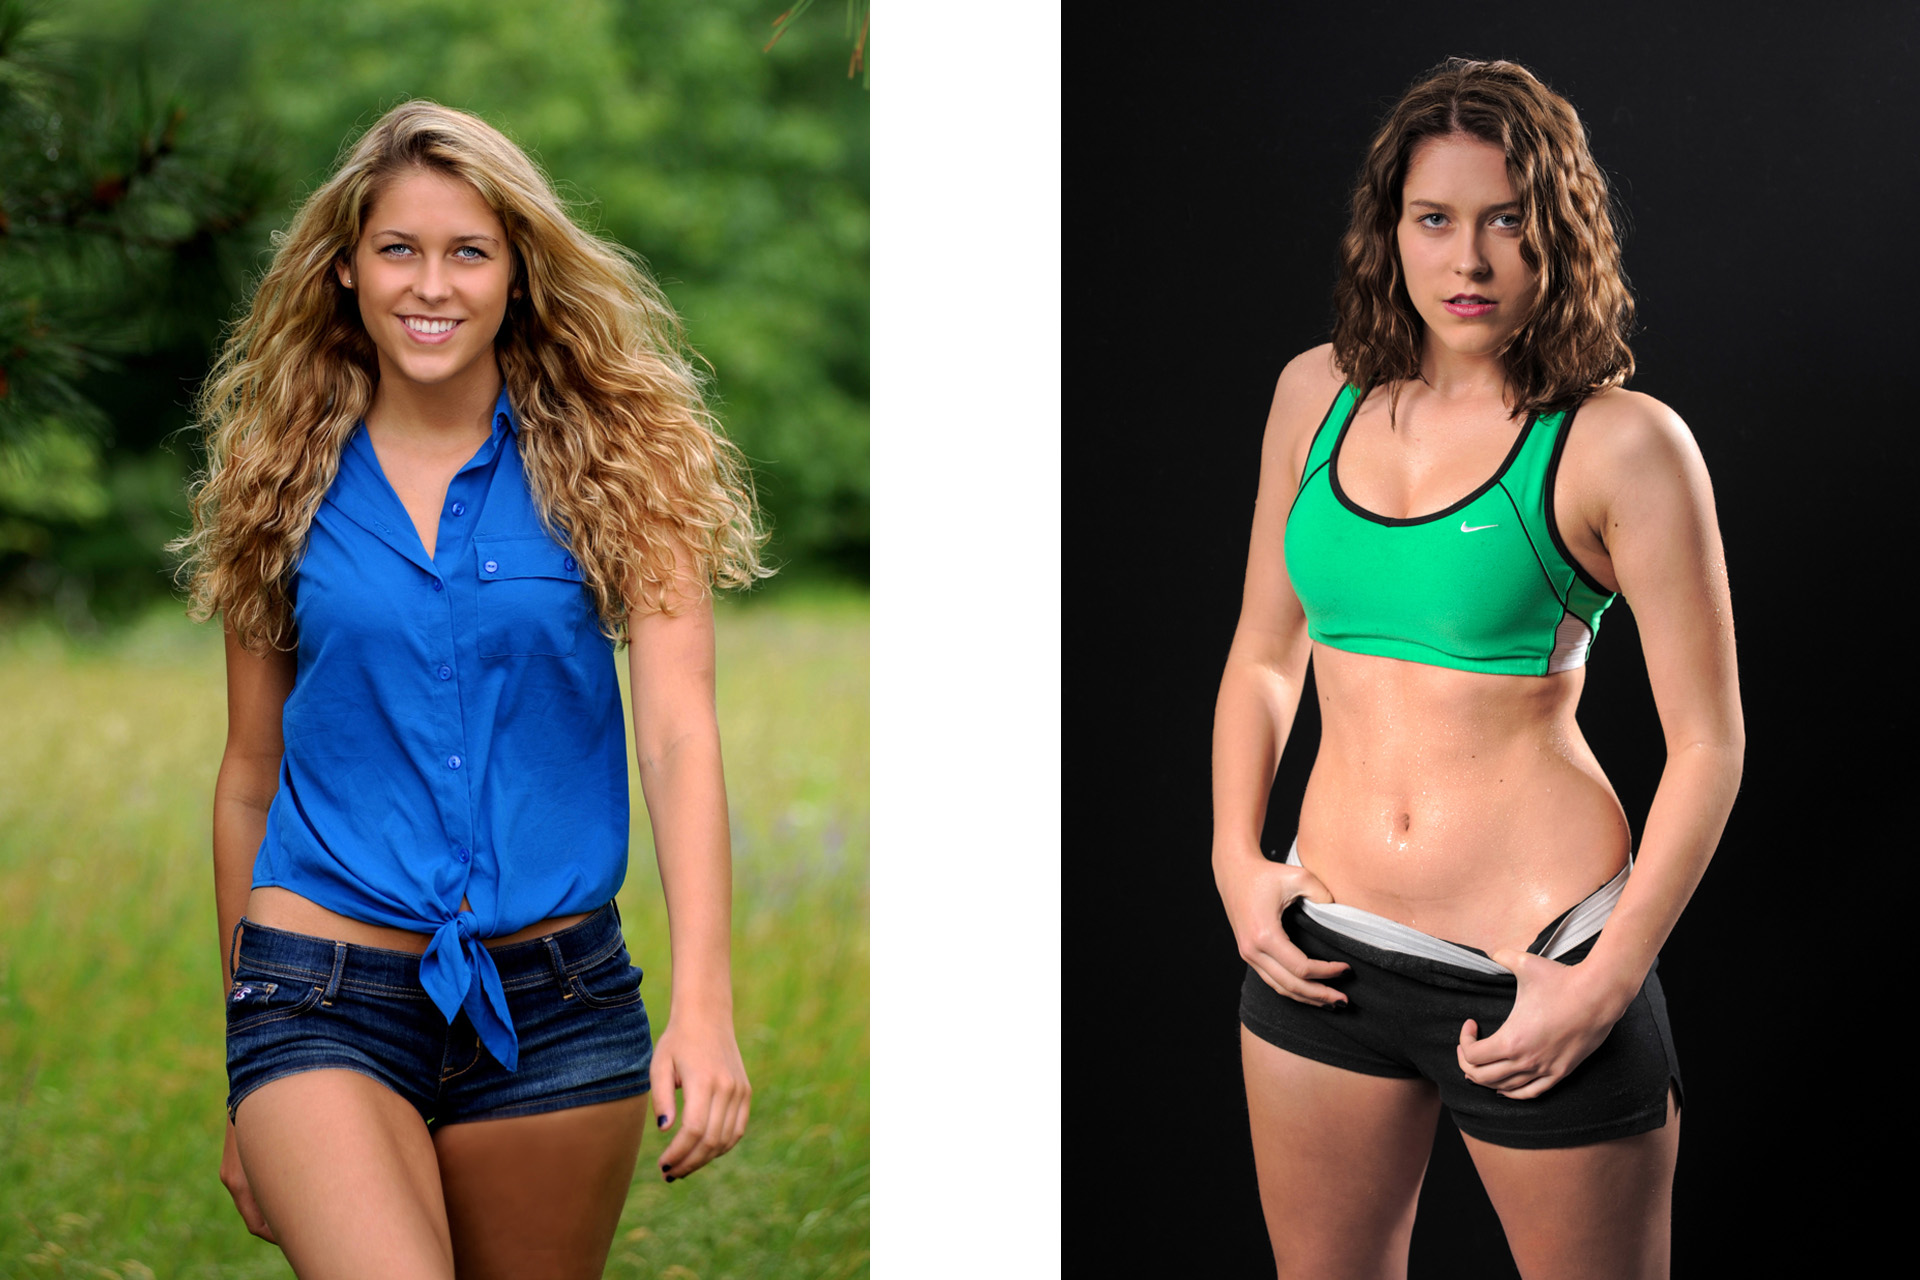 Best Detroit model photographer photographs repeat clients to show their changes in body and style as need be like this young model who started to showcase her athletic abilities and started to model sporting goods in metro Detroit, Michigan.